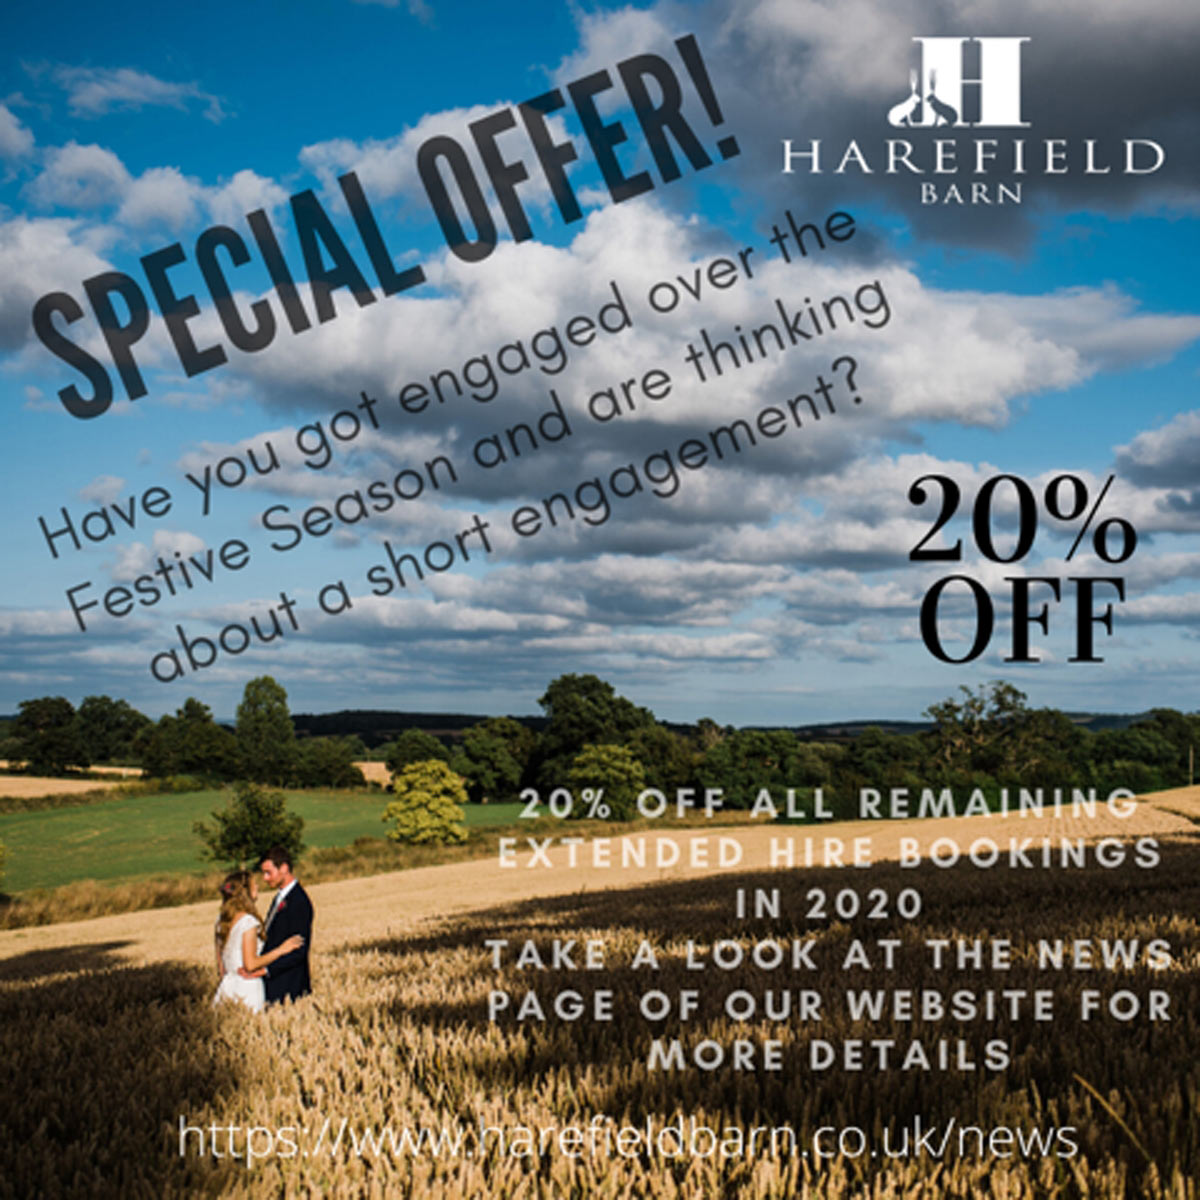 Special offer from Harefield Barn